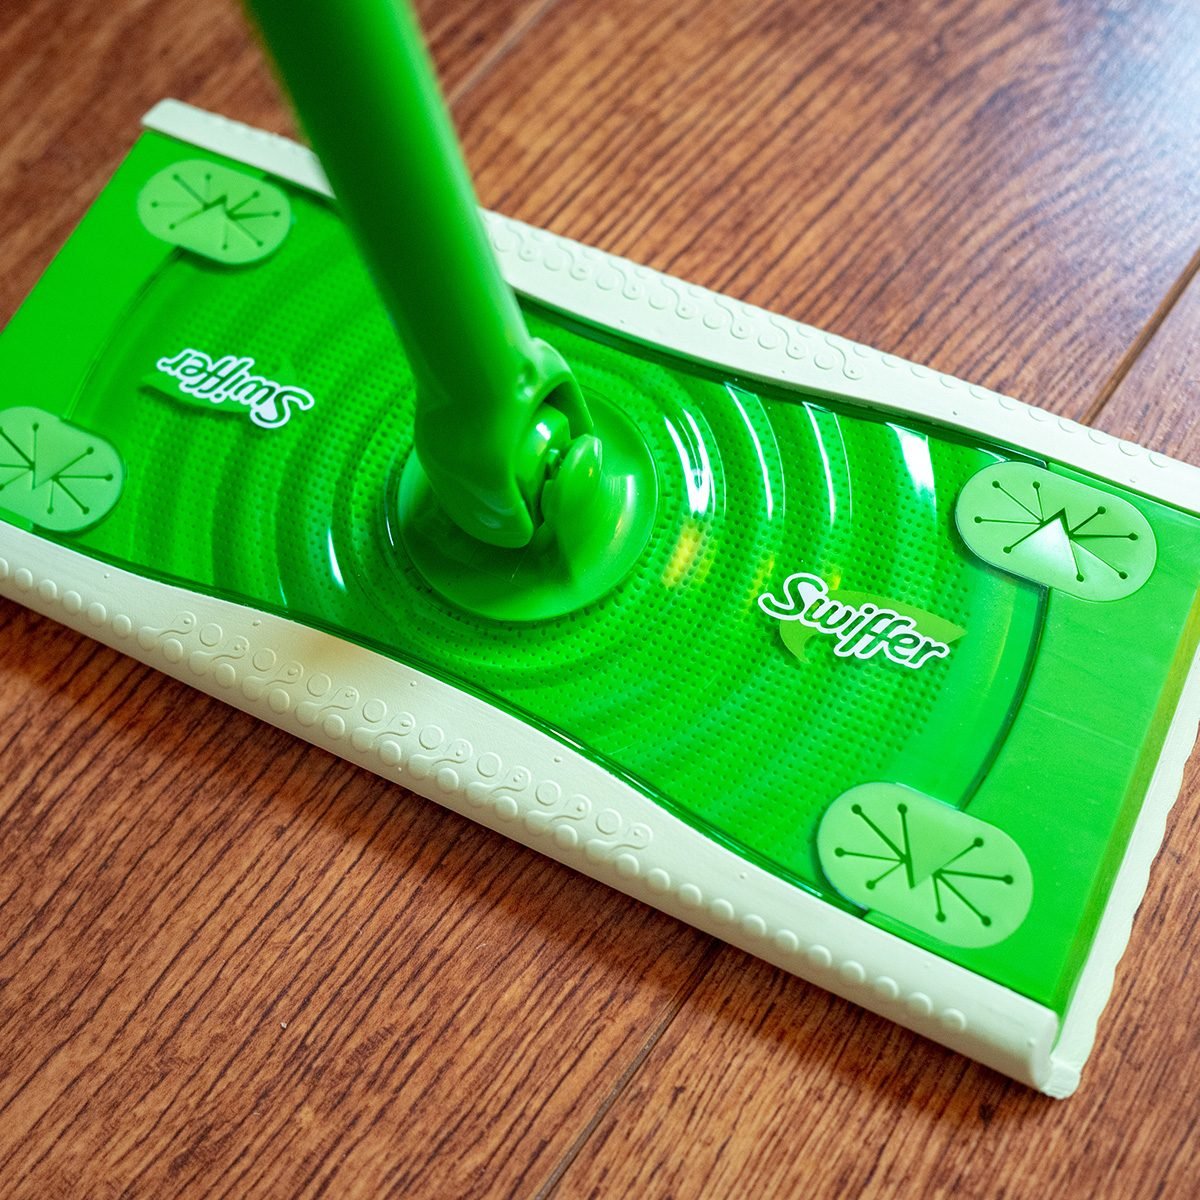 Taste of Home - This Swiffer hack will make cleaning SO much easier